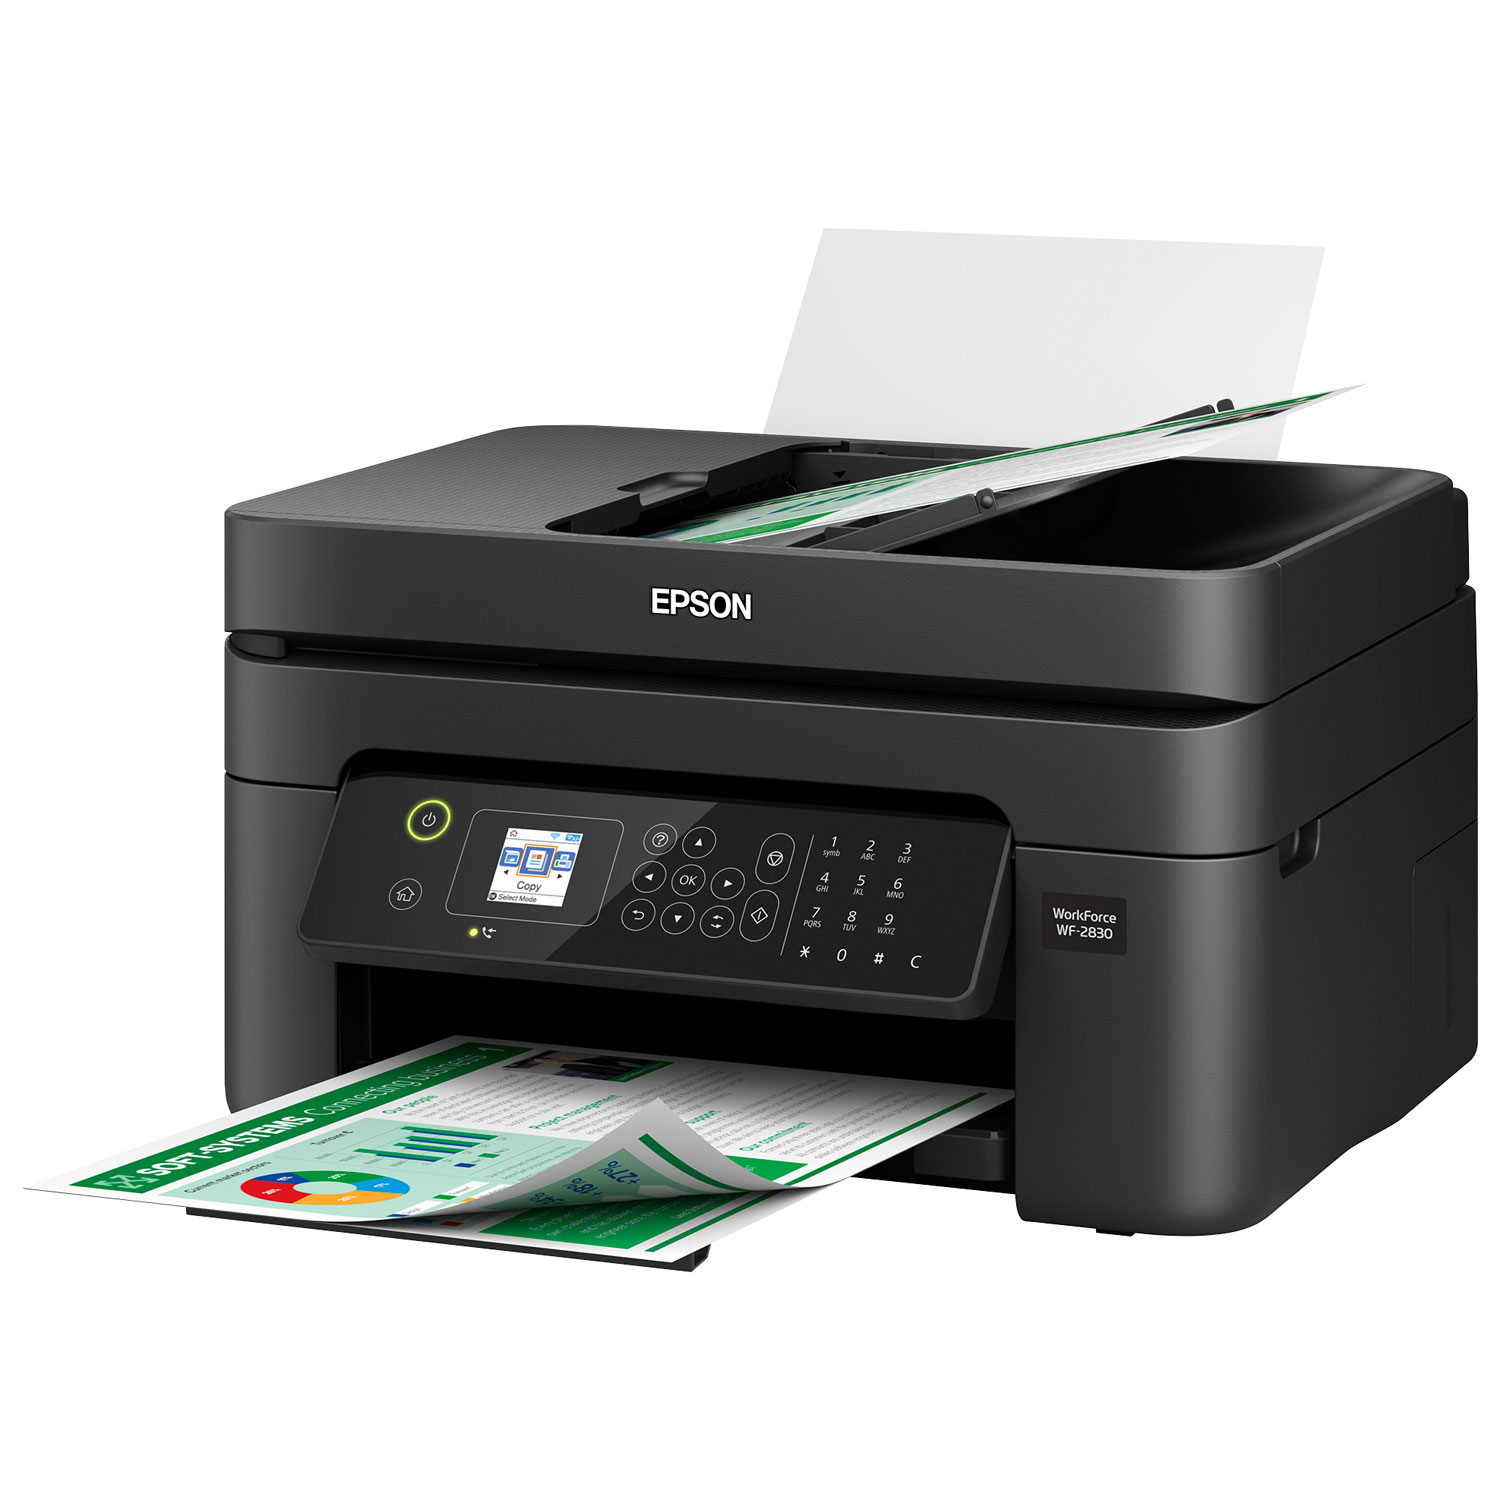 Epson Printer - connected